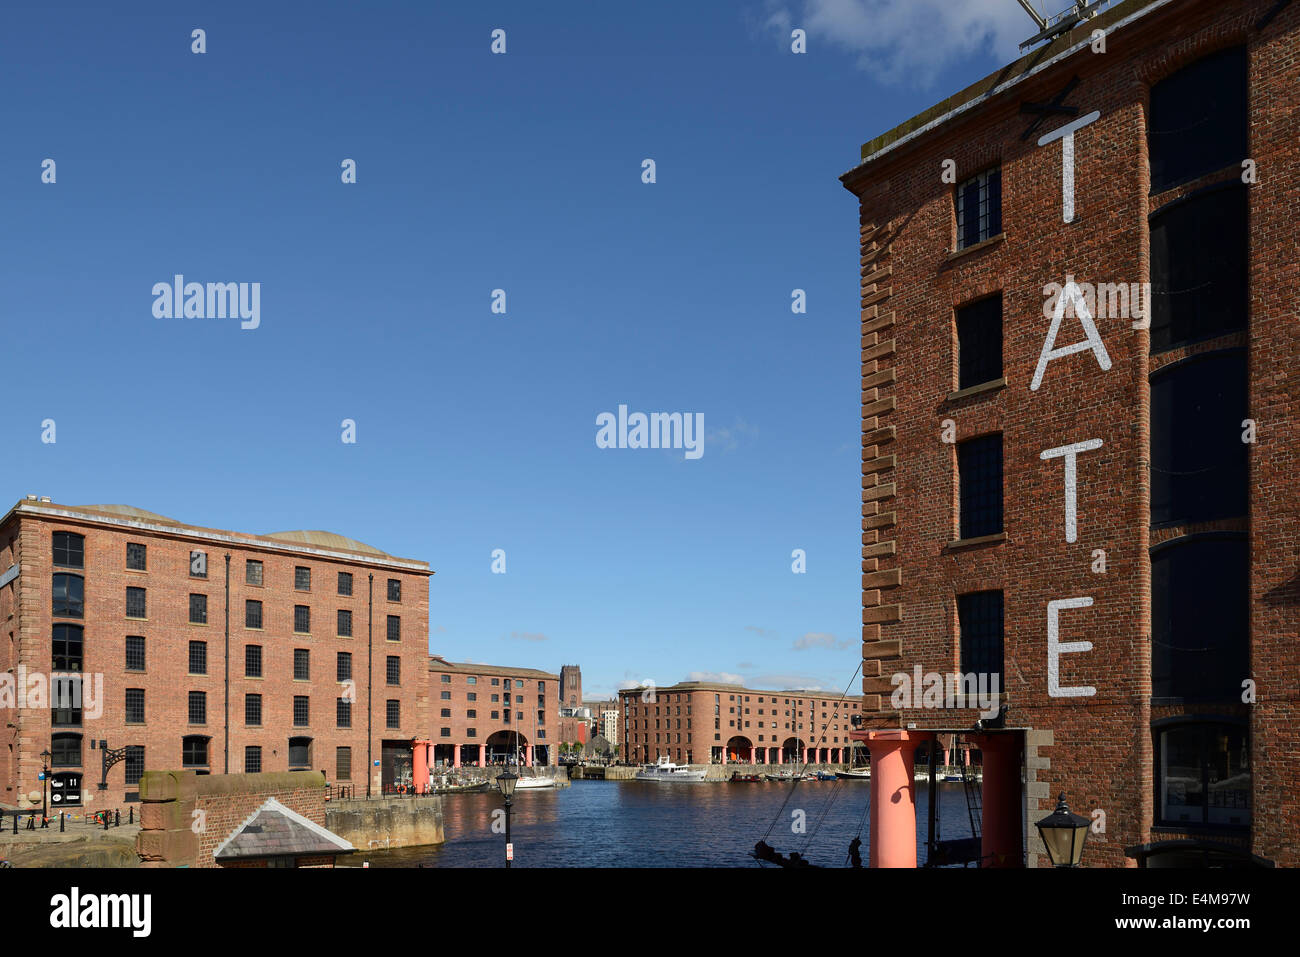 The Tate Liverpool art gallery building at the Albert Dock Liverpool UK Stock Photo